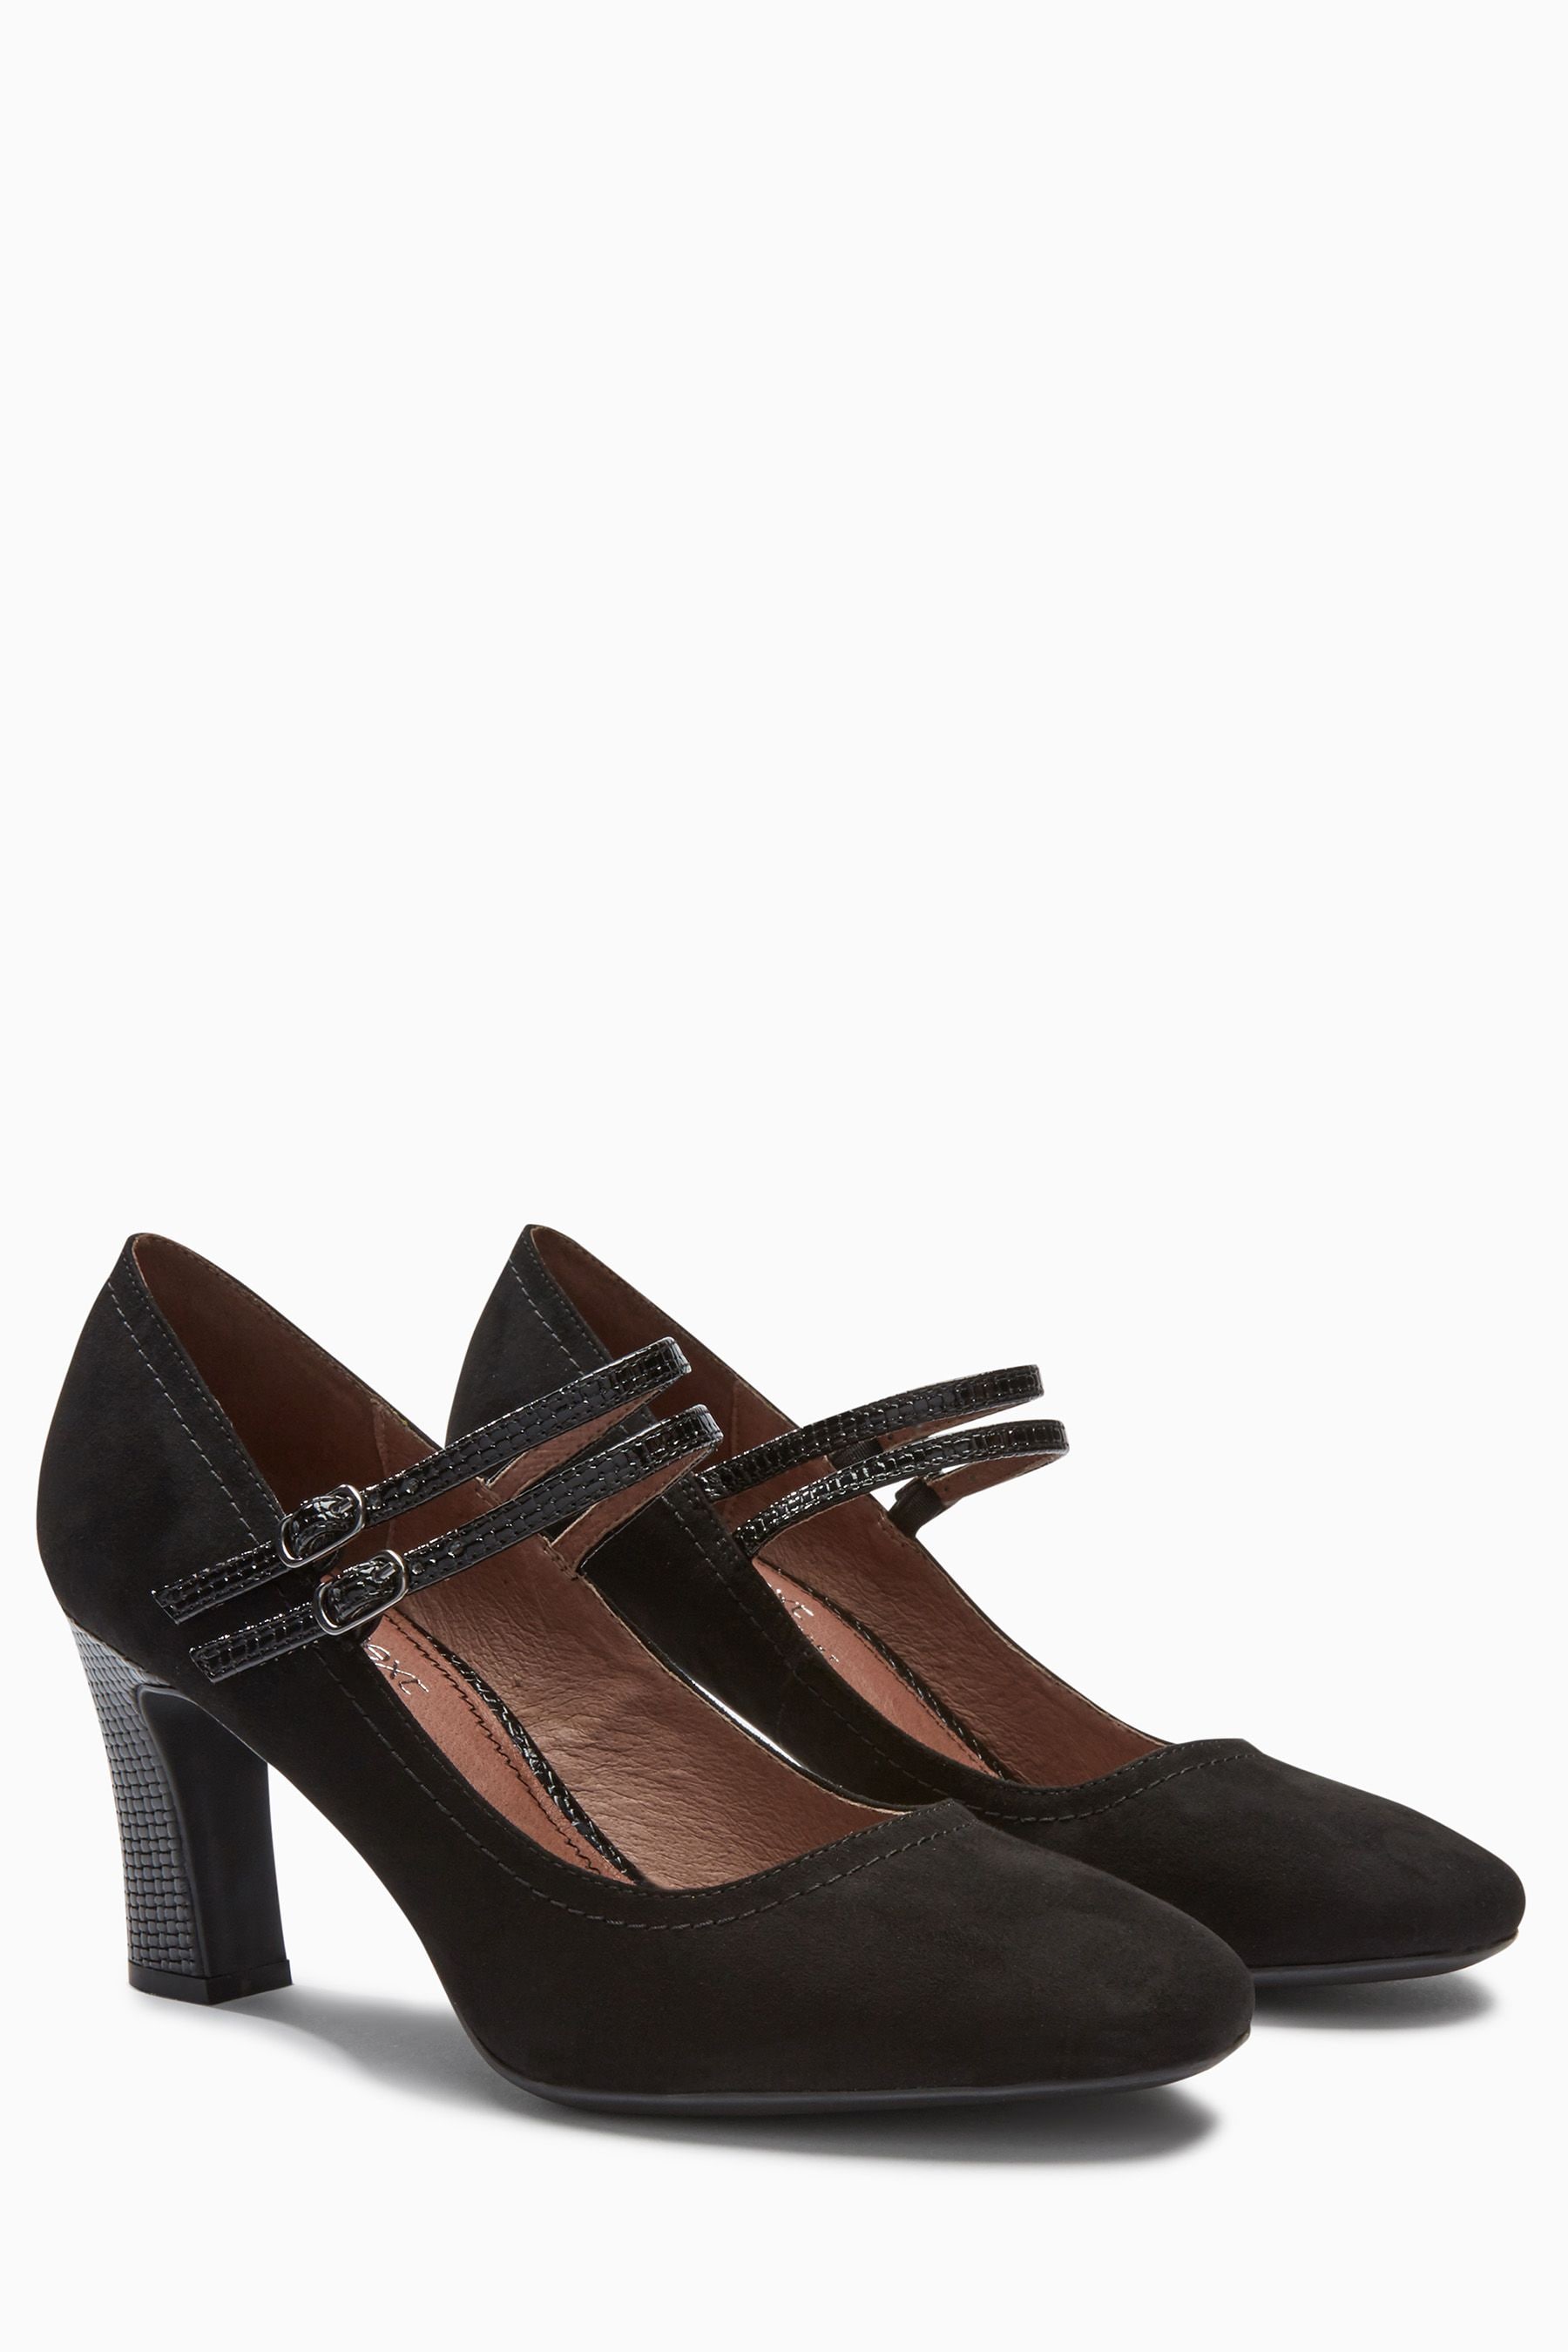 Buy Mary Jane Shoes from the Next UK online shop